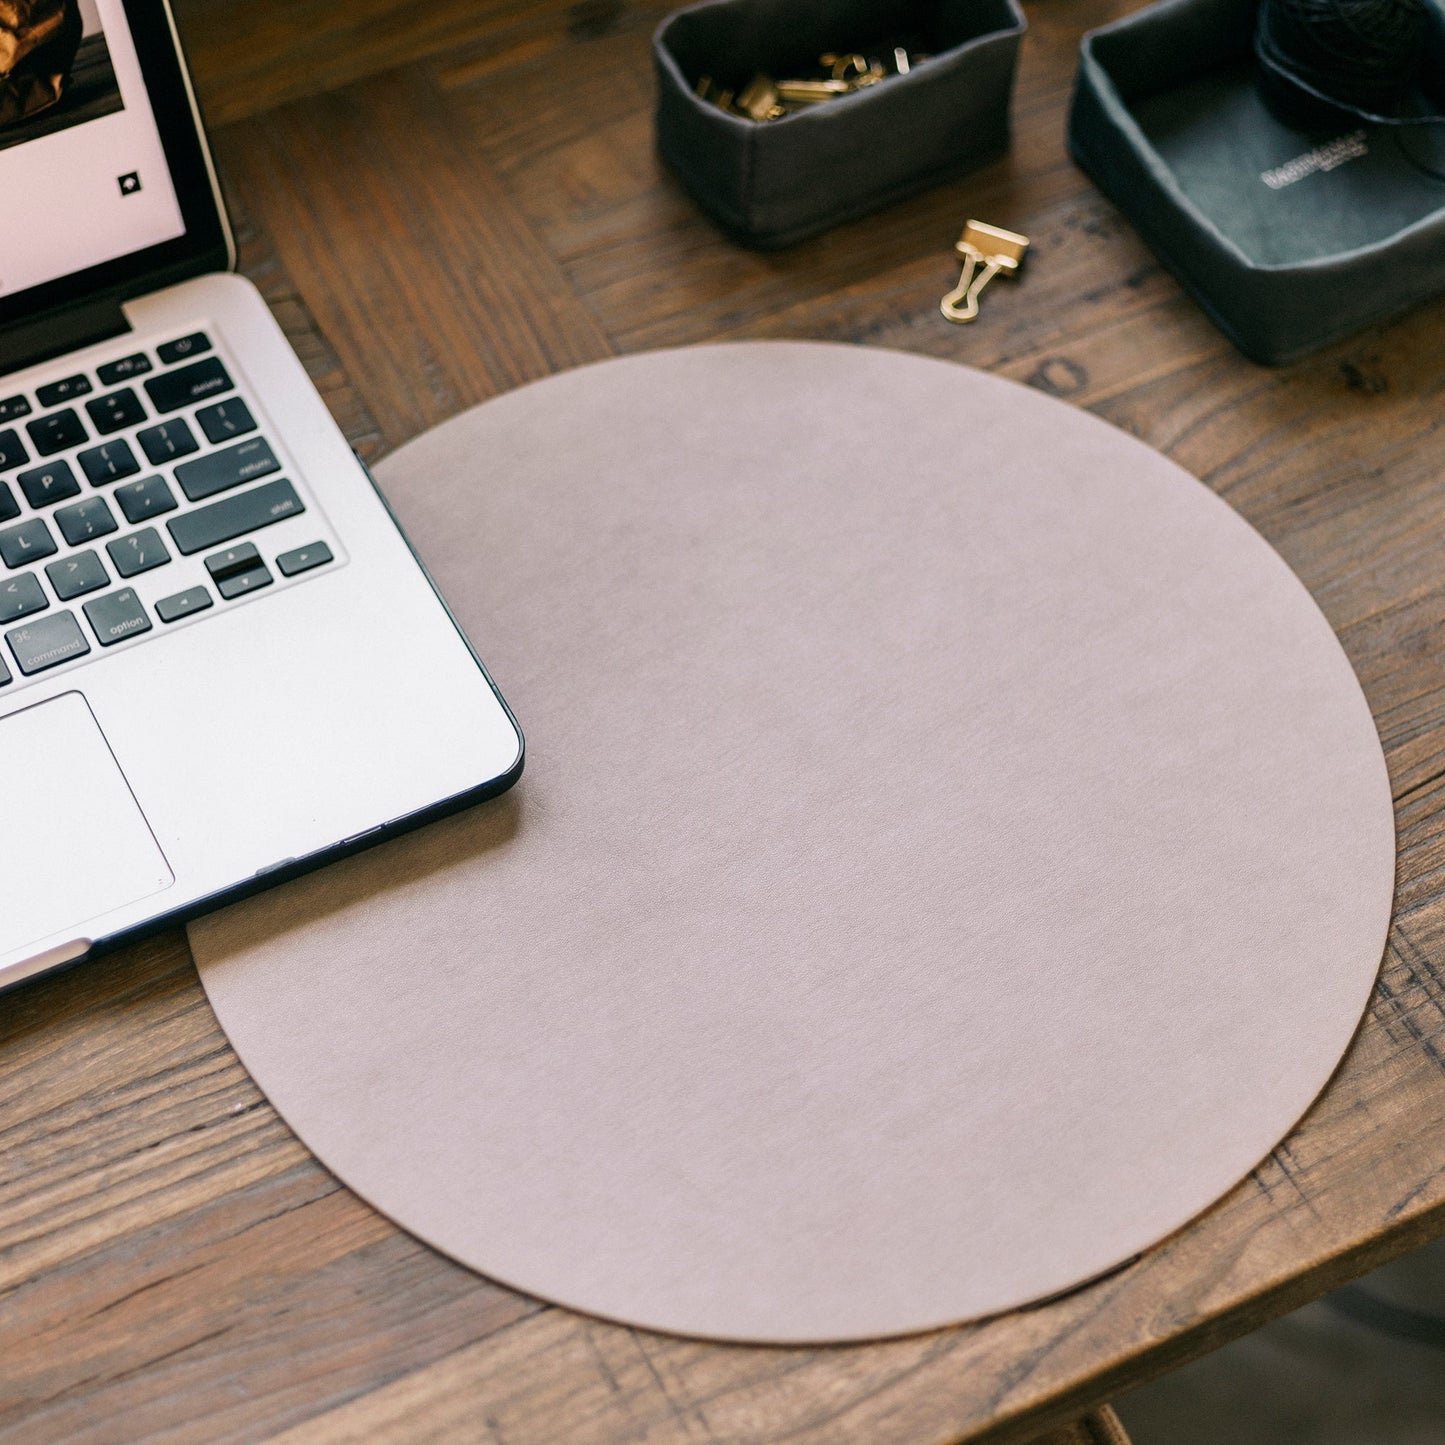 A beige round washable paper placemat is shown on a desk setting, under a laptop. At right are black washable paper small baskets containing stationery clips.